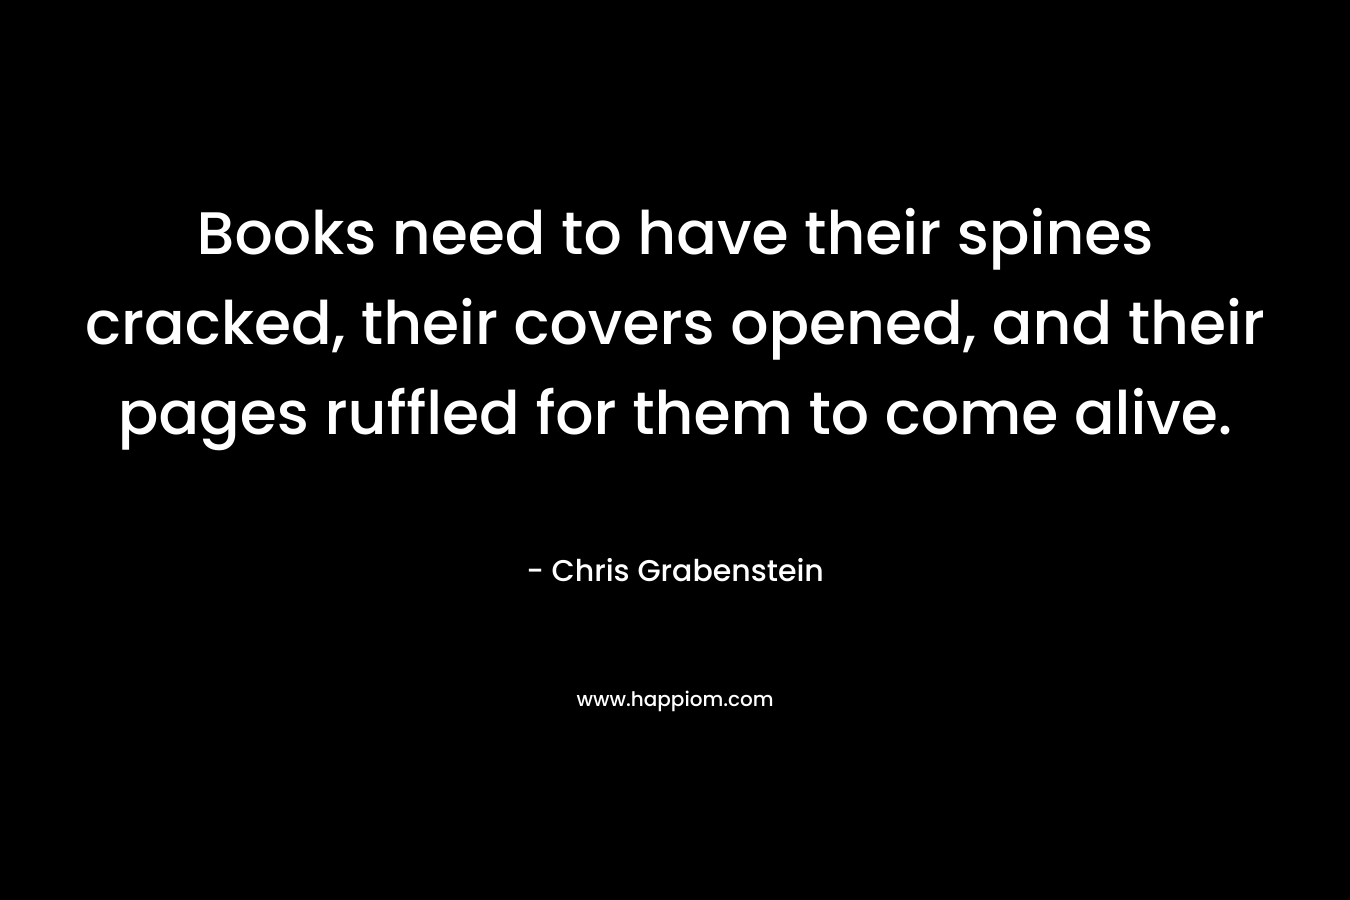 Books need to have their spines cracked, their covers opened, and their pages ruffled for them to come alive. – Chris Grabenstein